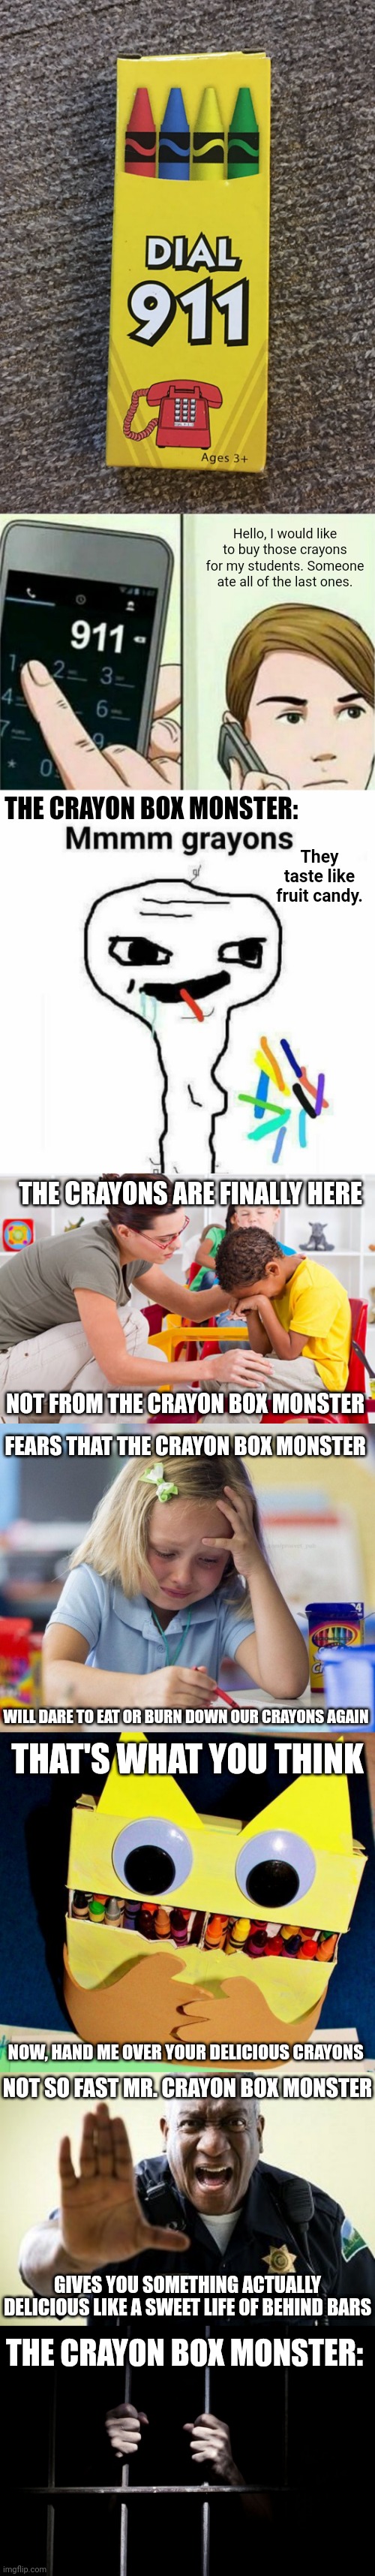 Dial 911 crayons long meme | Hello, I would like to buy those crayons for my students. Someone ate all of the last ones. THE CRAYON BOX MONSTER:; They taste like fruit candy. THE CRAYONS ARE FINALLY HERE; NOT FROM THE CRAYON BOX MONSTER; FEARS THAT THE CRAYON BOX MONSTER; WILL DARE TO EAT OR BURN DOWN OUR CRAYONS AGAIN; THAT'S WHAT YOU THINK; NOW, HAND ME OVER YOUR DELICIOUS CRAYONS; NOT SO FAST MR. CRAYON BOX MONSTER; GIVES YOU SOMETHING ACTUALLY DELICIOUS LIKE A SWEET LIFE OF BEHIND BARS; THE CRAYON BOX MONSTER: | image tagged in calling 911,memes,funny,crayons,blank white template,you had one job | made w/ Imgflip meme maker